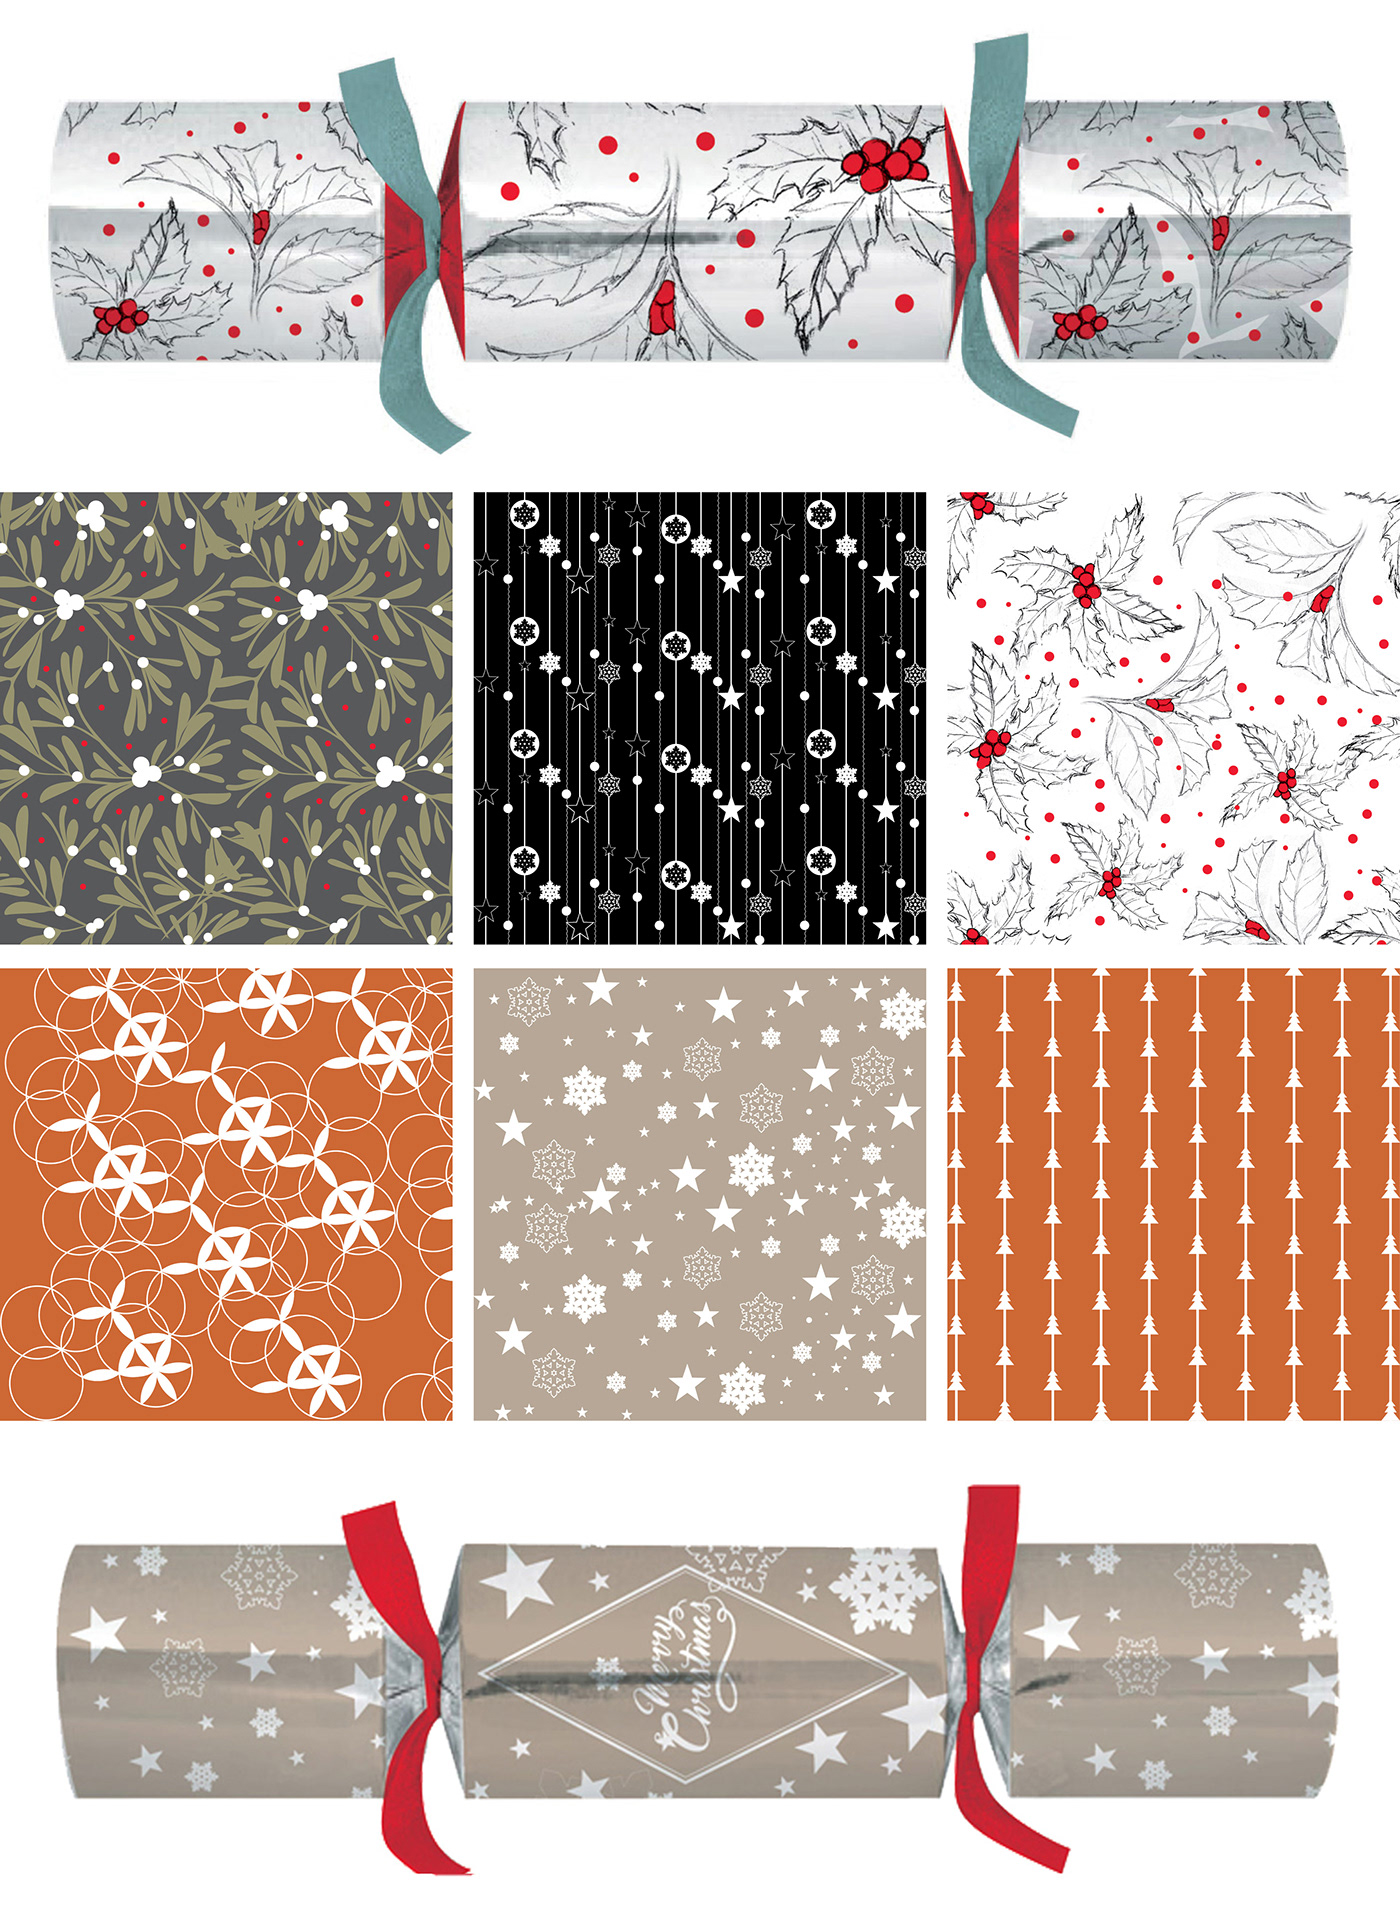 Textile prints created for Christmas using a combination of traditional and digital methods